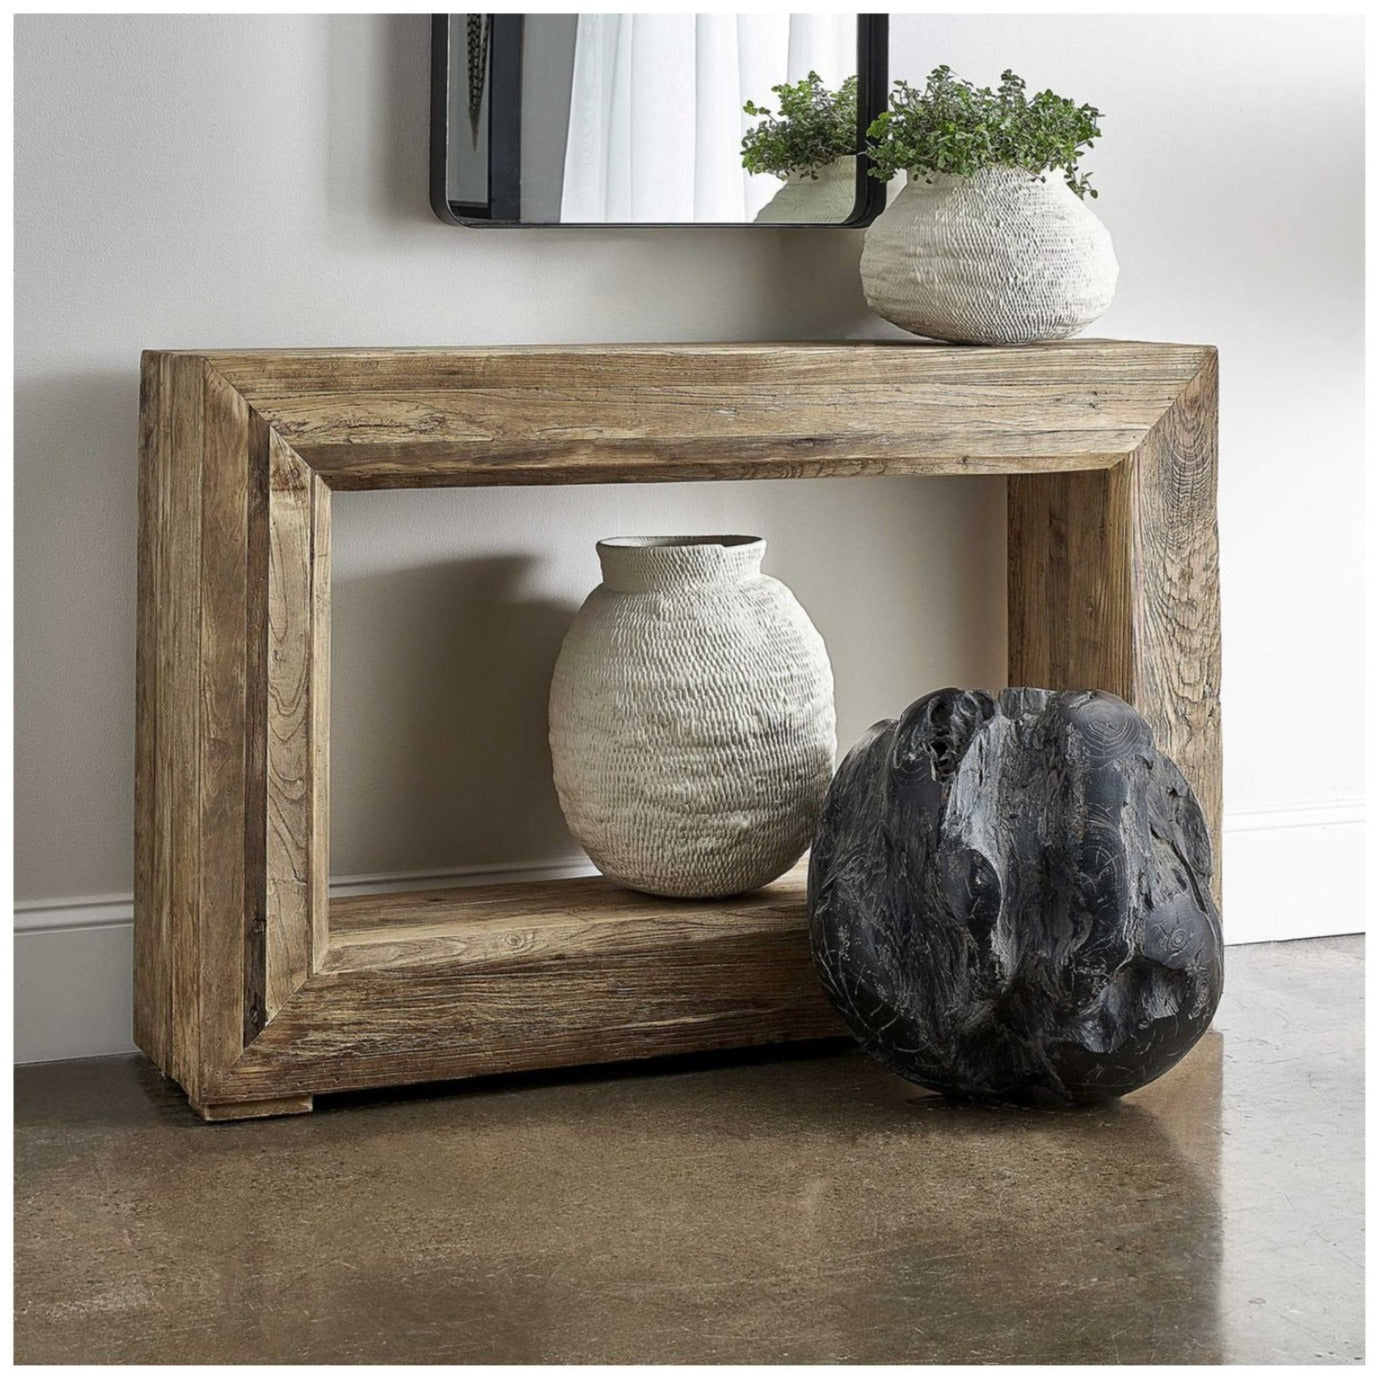 Room setting with console of character in rich reclaimed elm wood, featuring a beveled open center design. Decorated with large white vases on top and bottom, large wood ball sitting on floor in front and mirror hanging on wall above.carved 